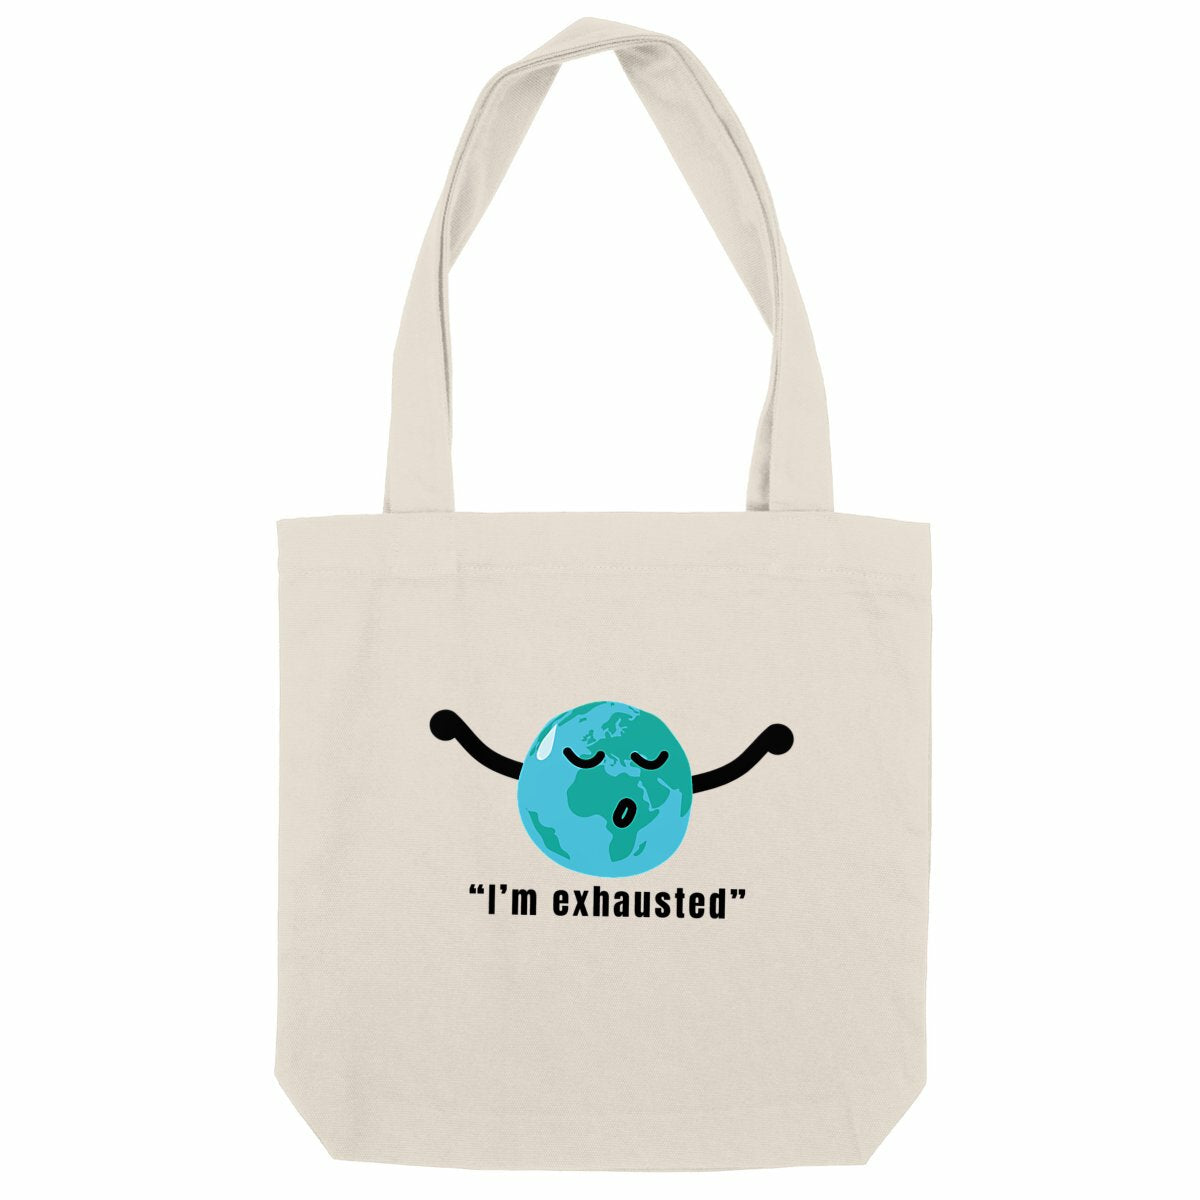 I'm exhausted - Tote Thick Fabric